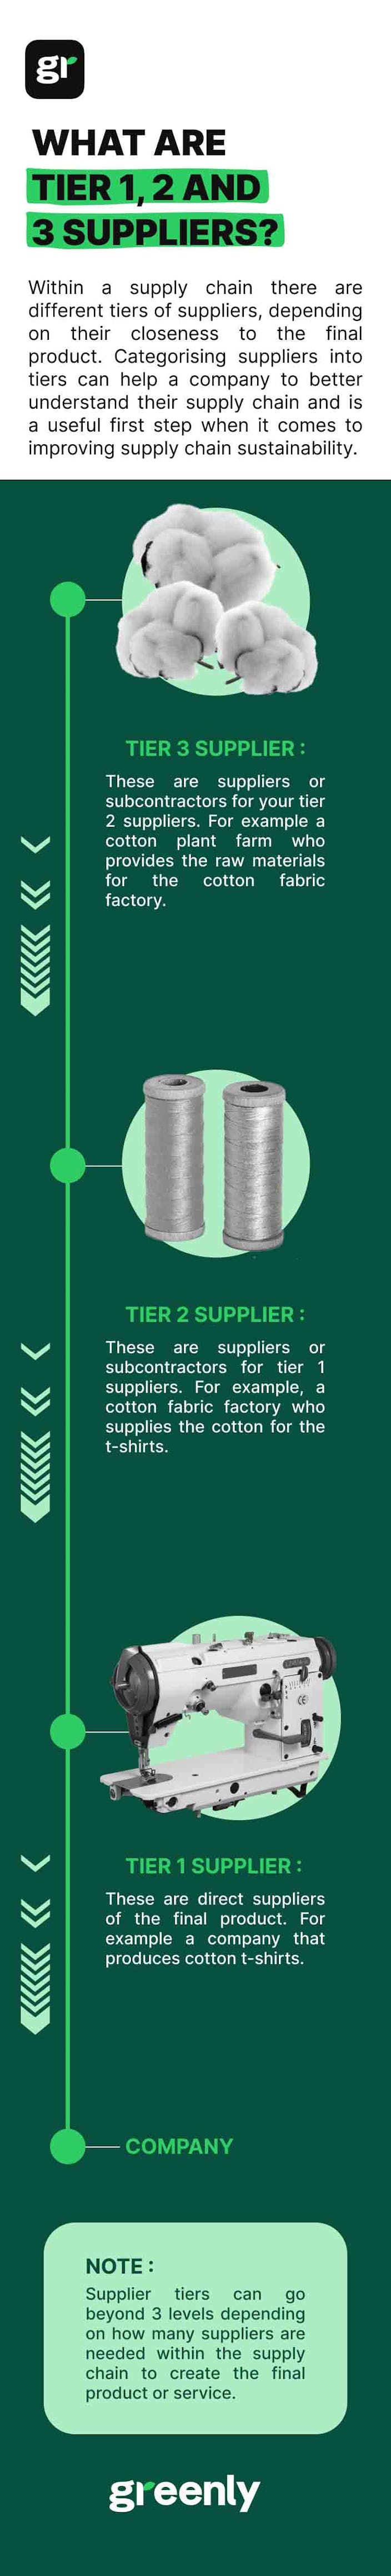 tier suppliers infographic